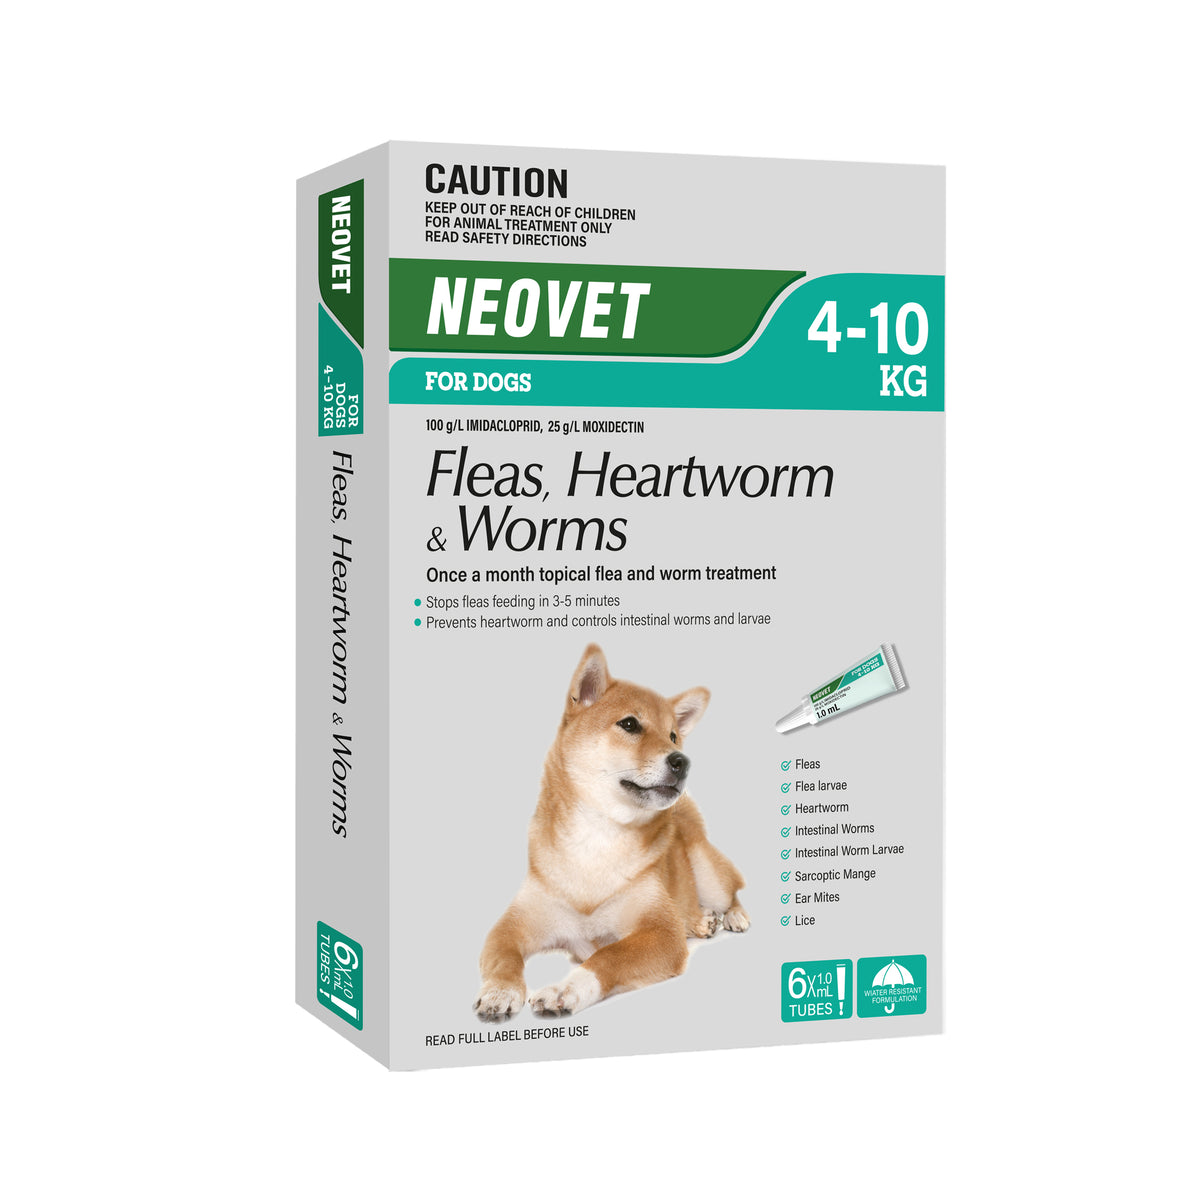 Neovet for Dogs (Fleas, Heartworm &amp; Worms) 4-10kg